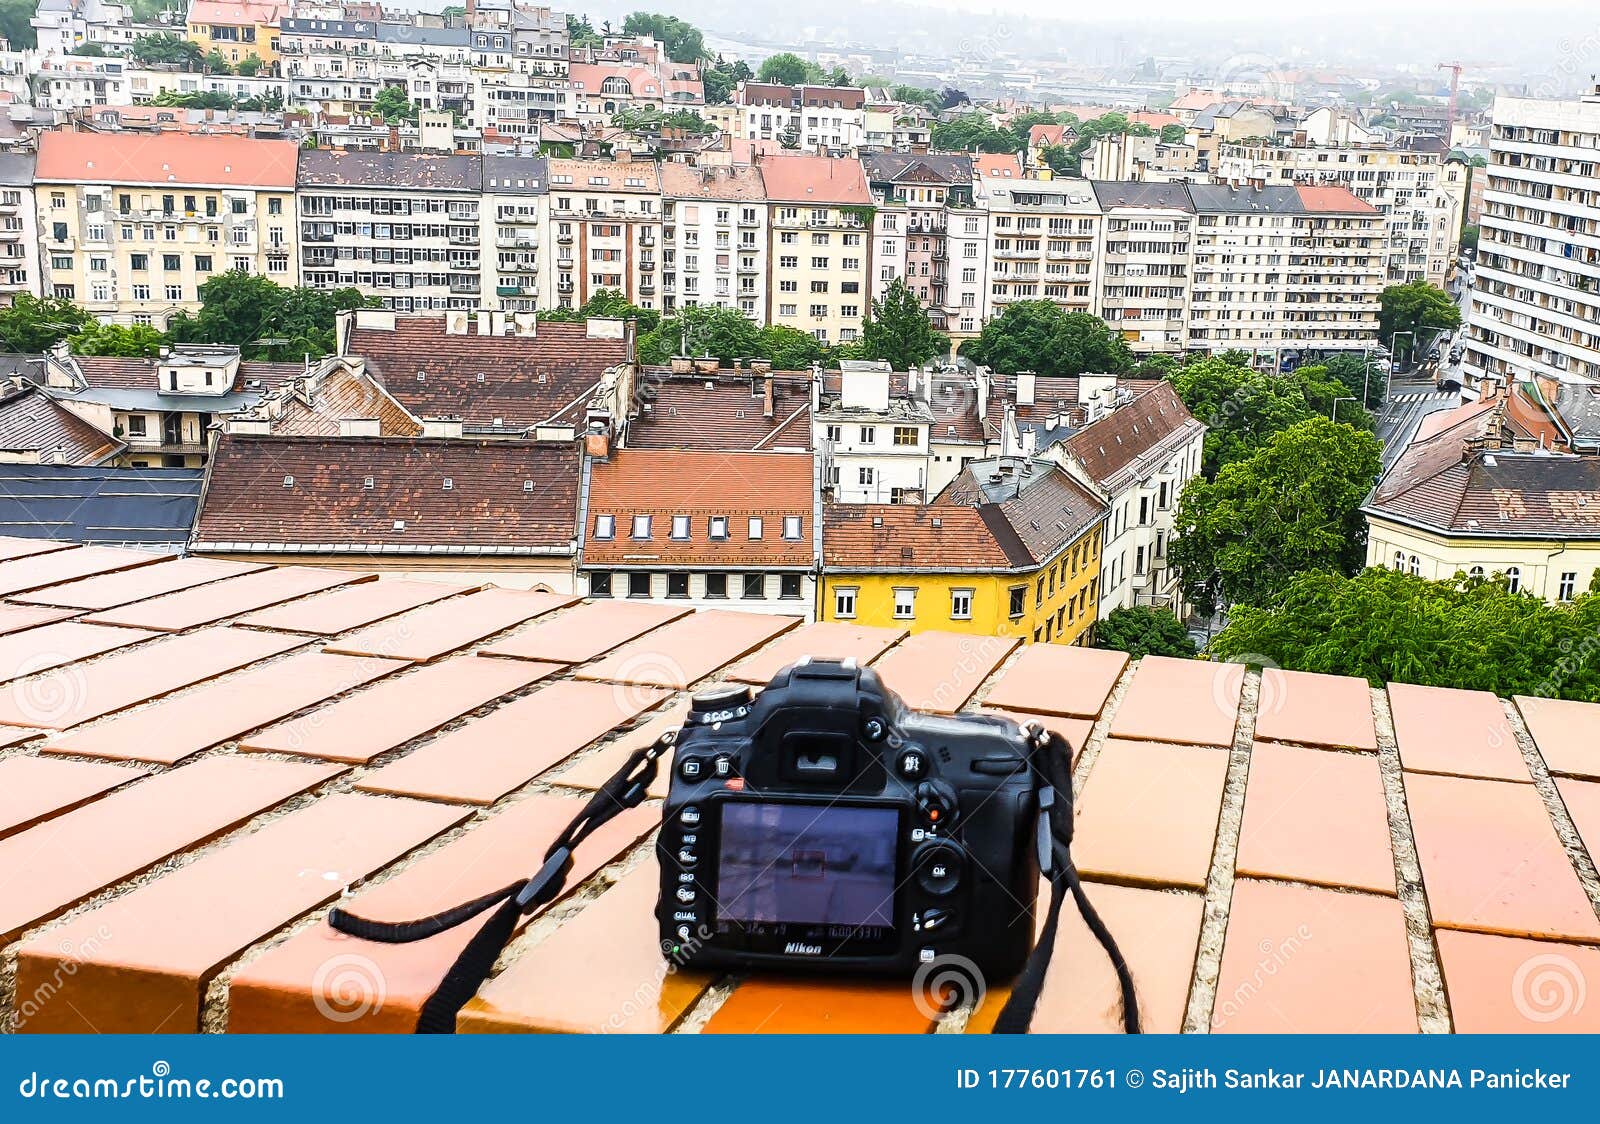 photo of budapest city view and a nikon d7000 camera from top of buda castle